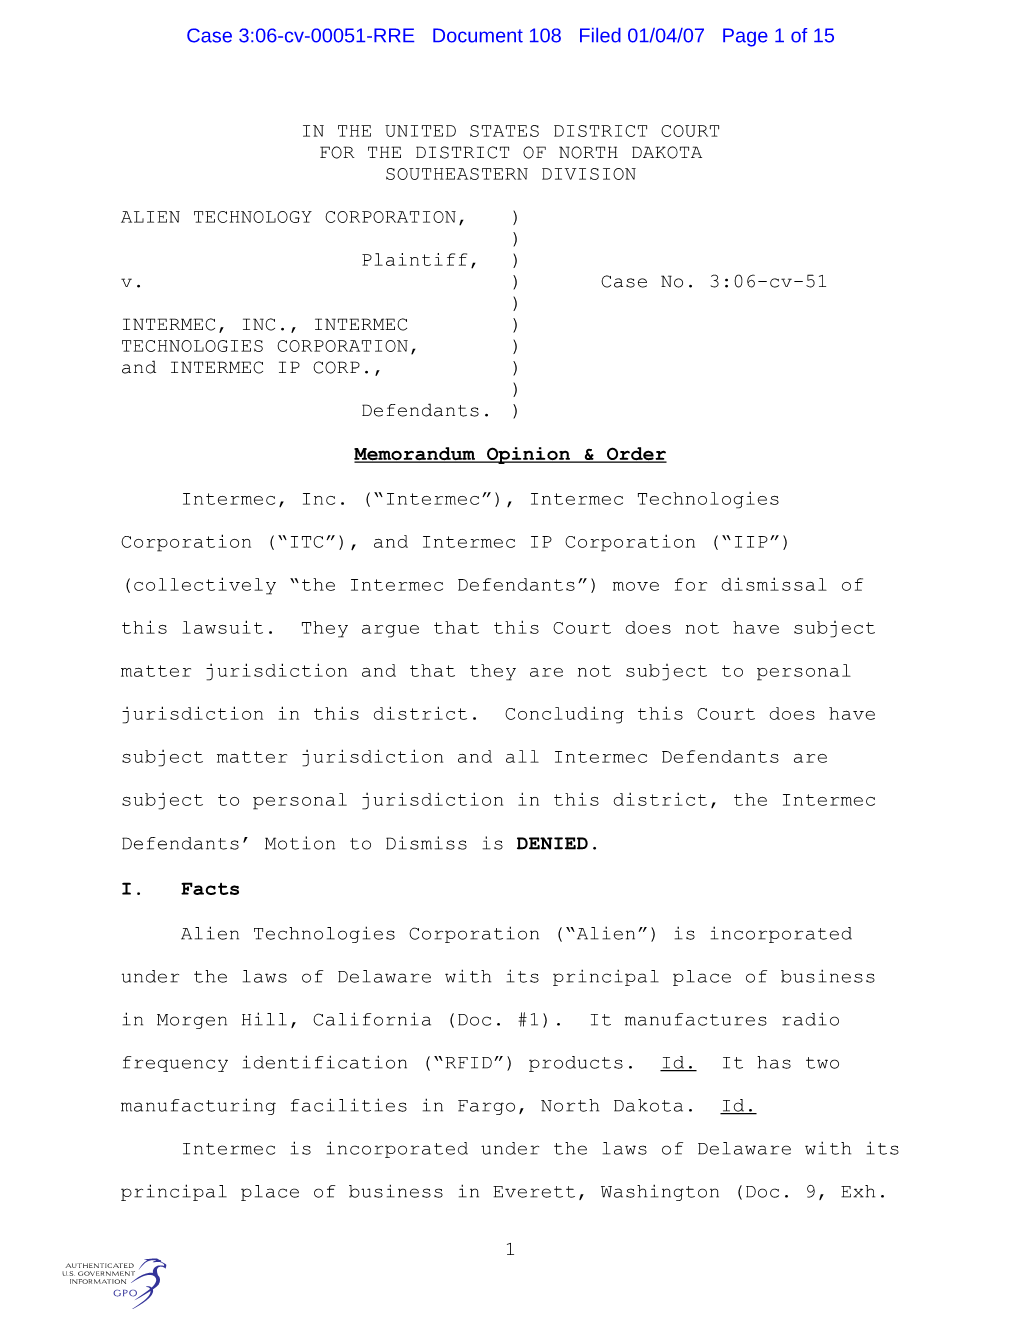 Case 3:06-Cv-00051-RRE Document 108 Filed 01/04/07 Page 1 of 15